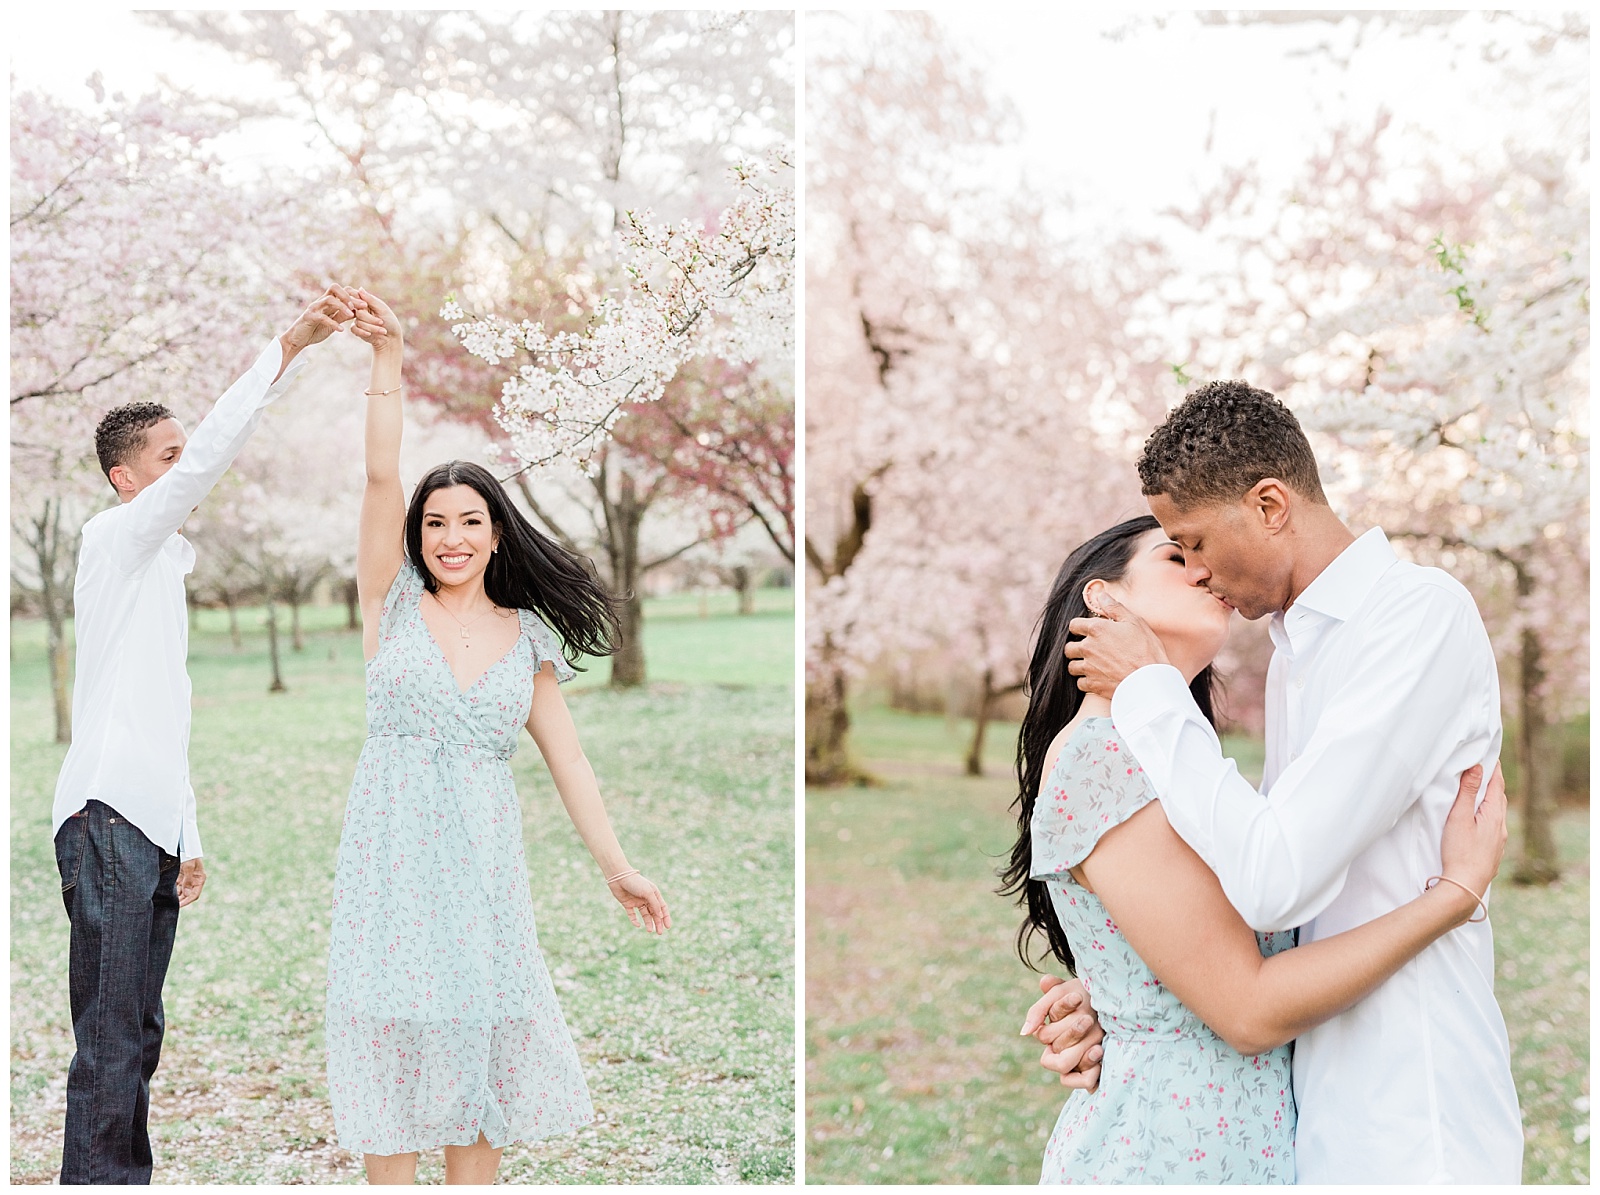 A man dances with a woman in a light blue spring dress under the cherry blossom trees in Branch Brook Park.